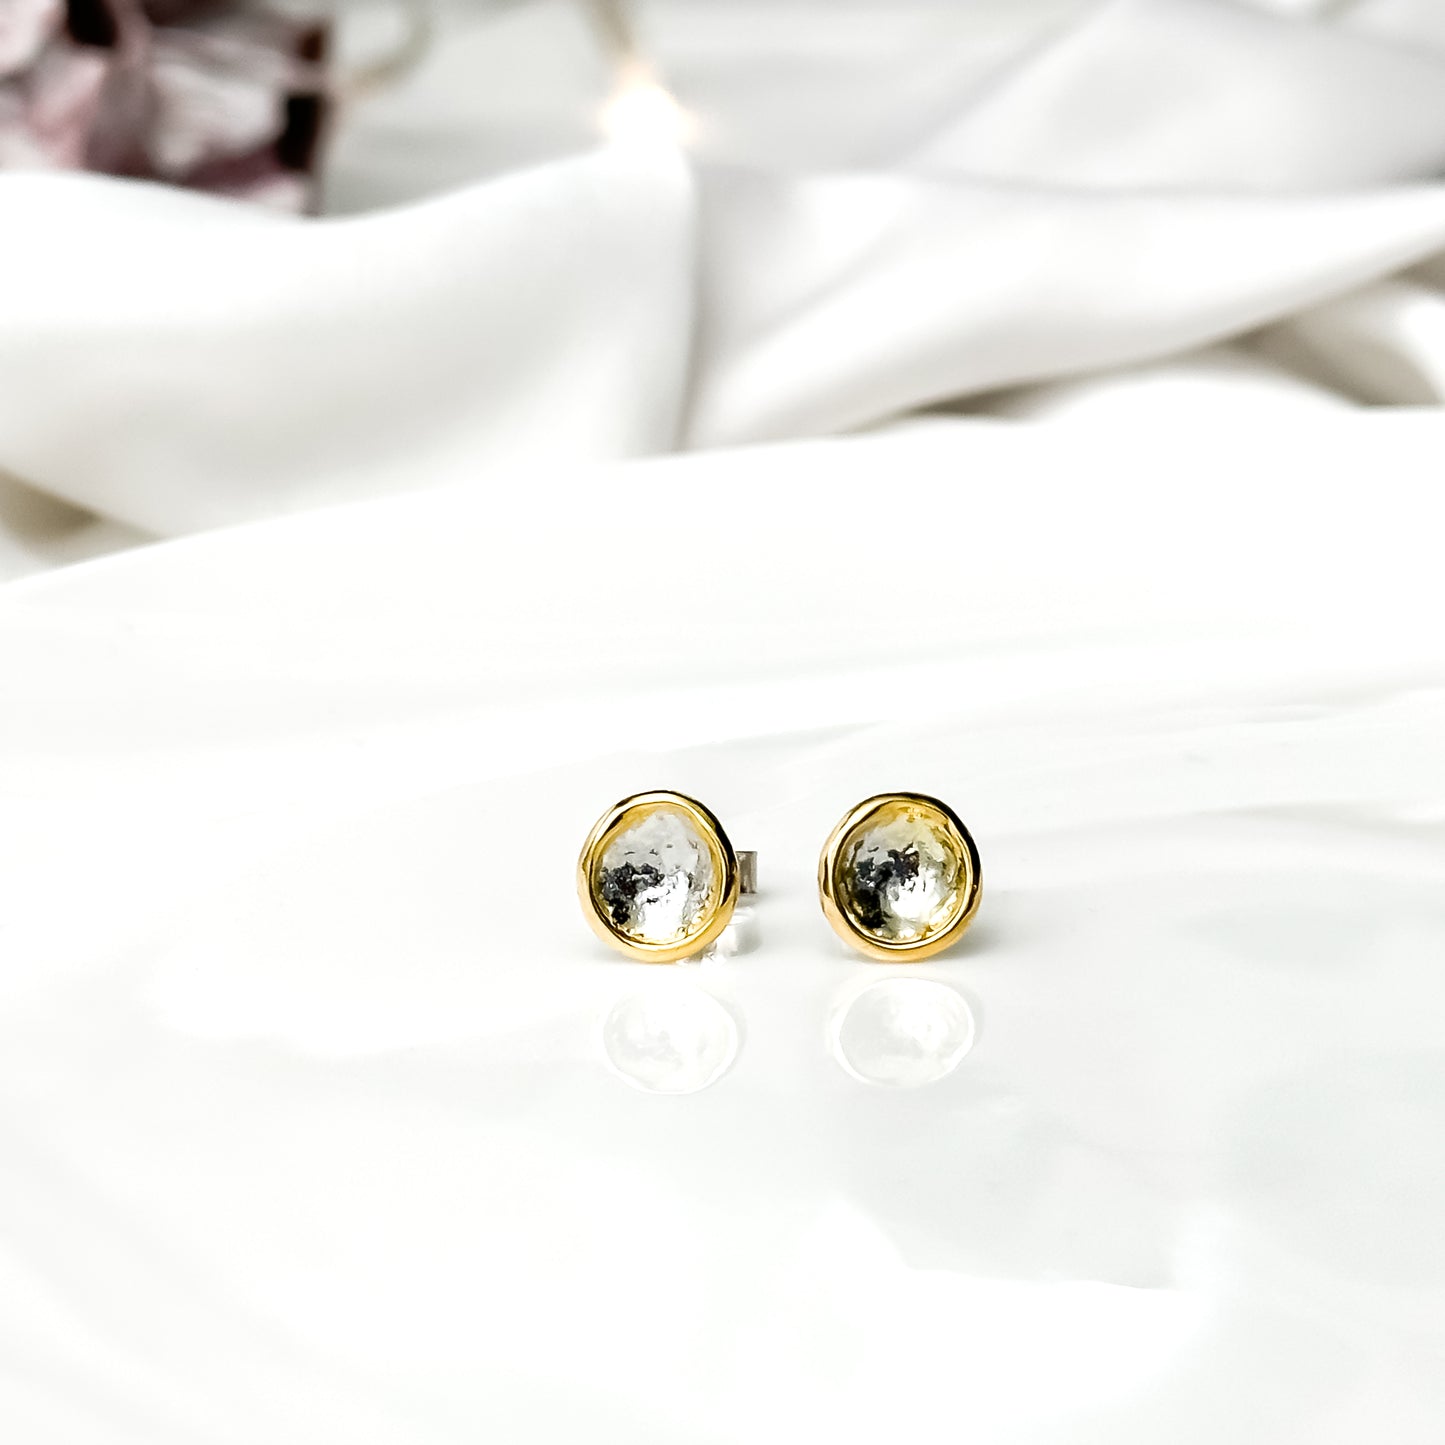 Silver and Gold Droplet Stud Earrings